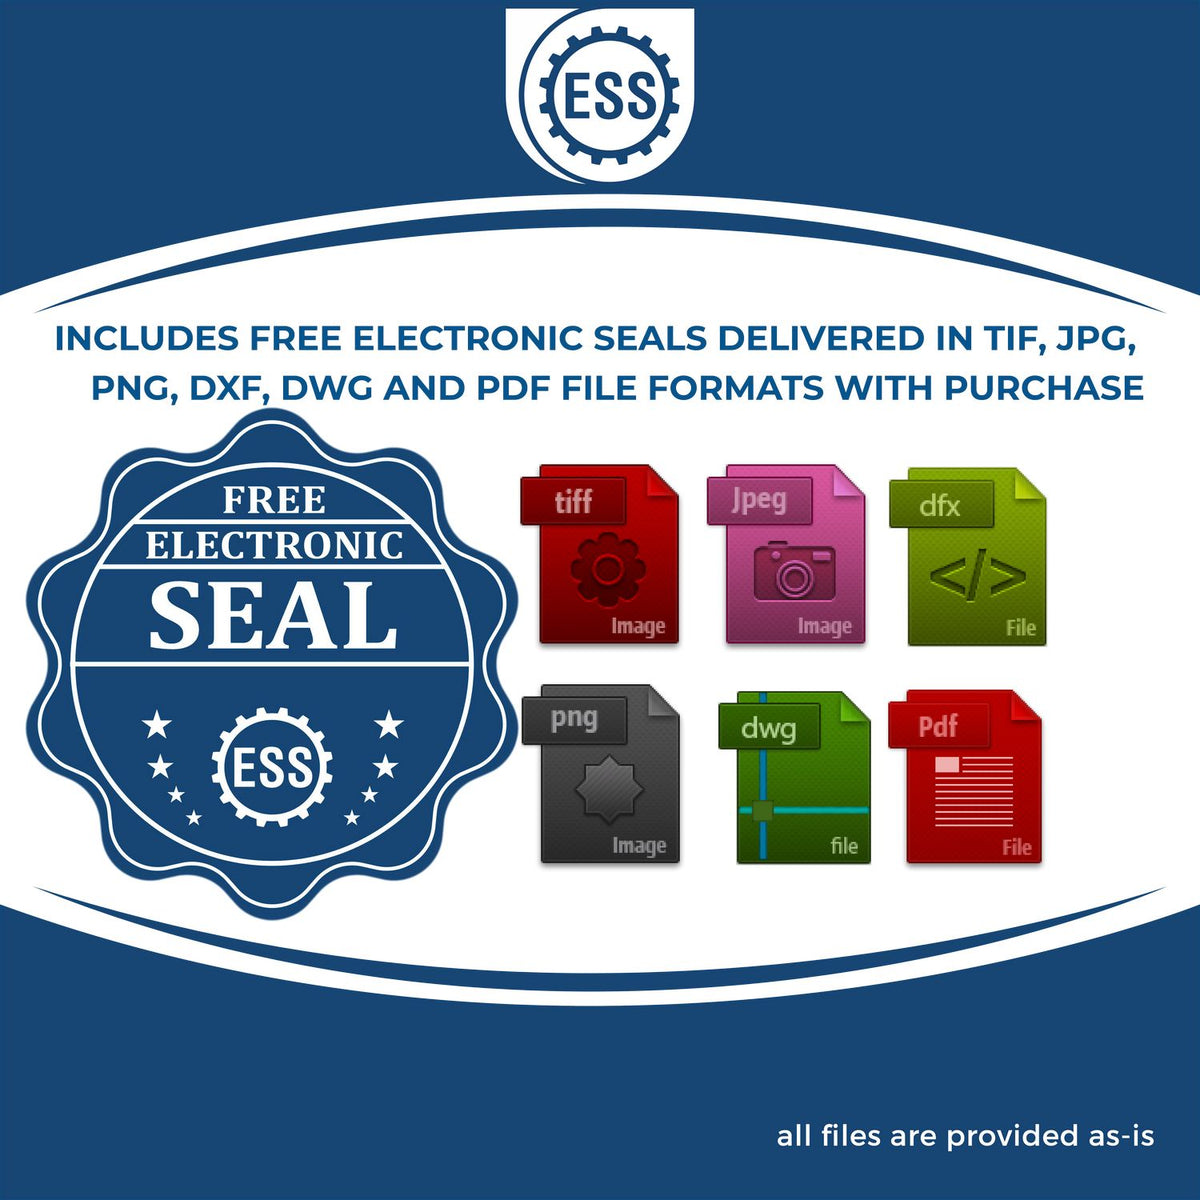 An infographic for the free electronic seal for the New Jersey Desk Architect Embossing Seal illustrating the different file type icons such as DXF, DWG, TIF, JPG and PNG.